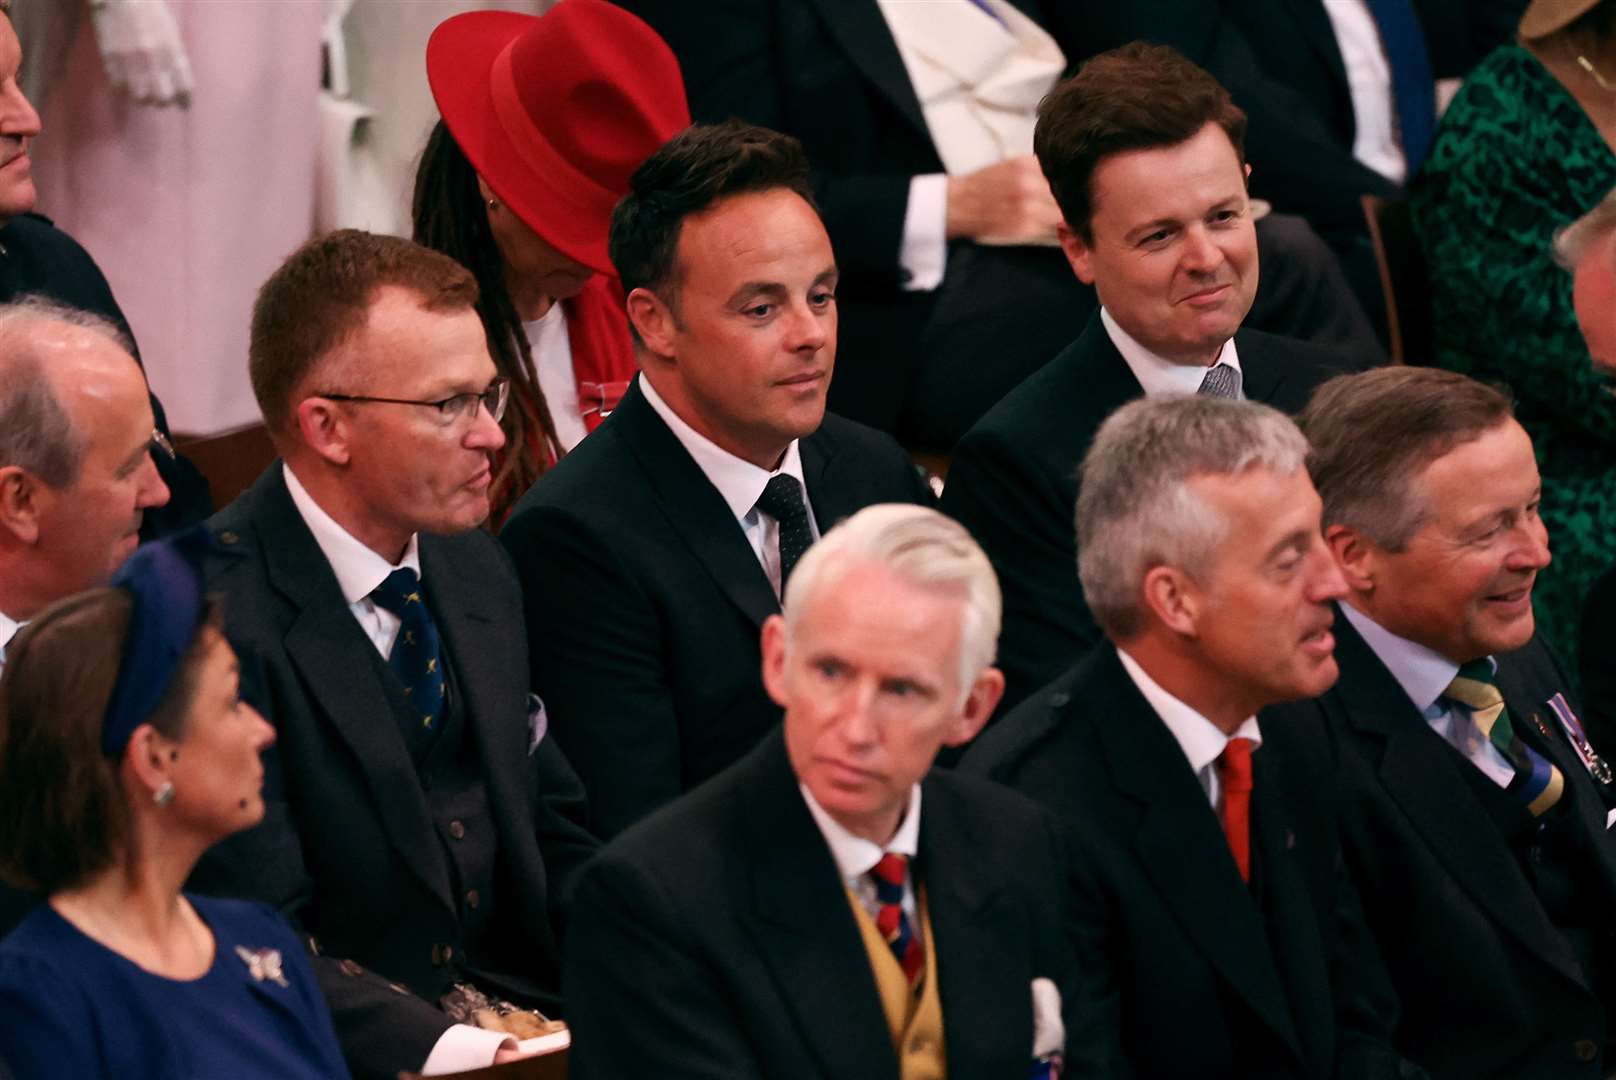 Anthony McPartlin and Declan Donnelly in the pews ahead of the coronation (Phil Noble/PA)